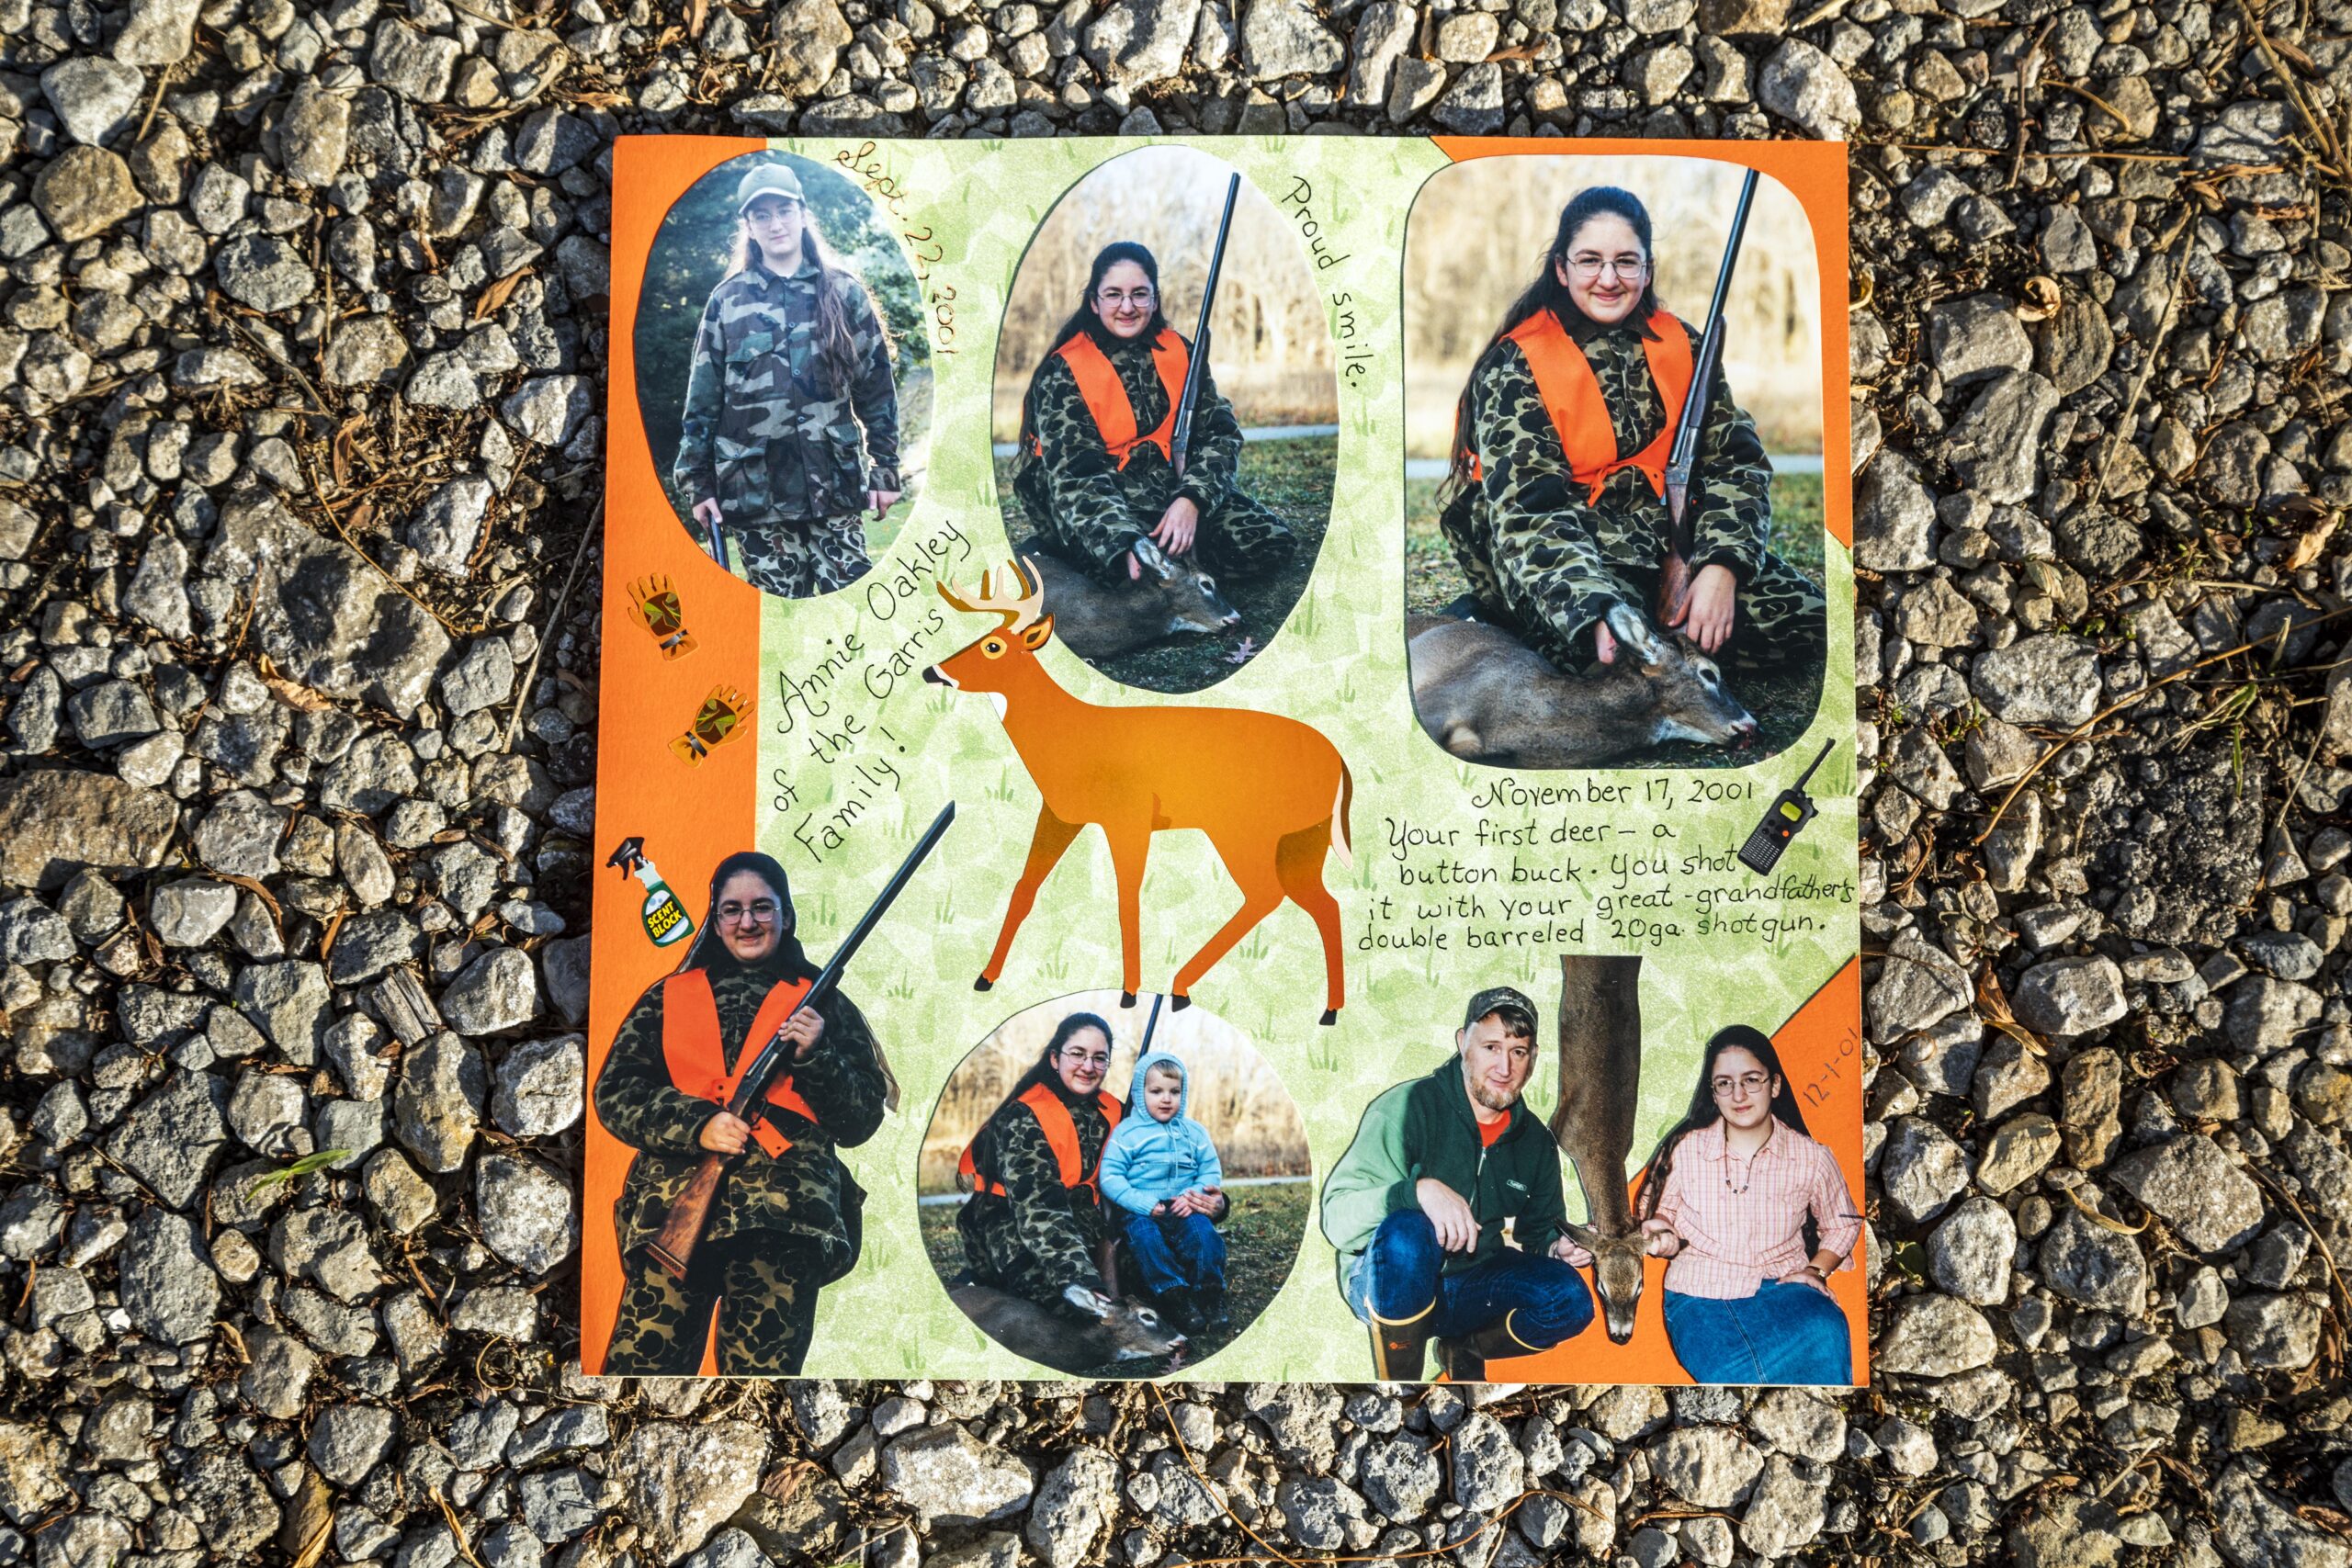 A hunting scrapbook with photos of Beka Garris in it.